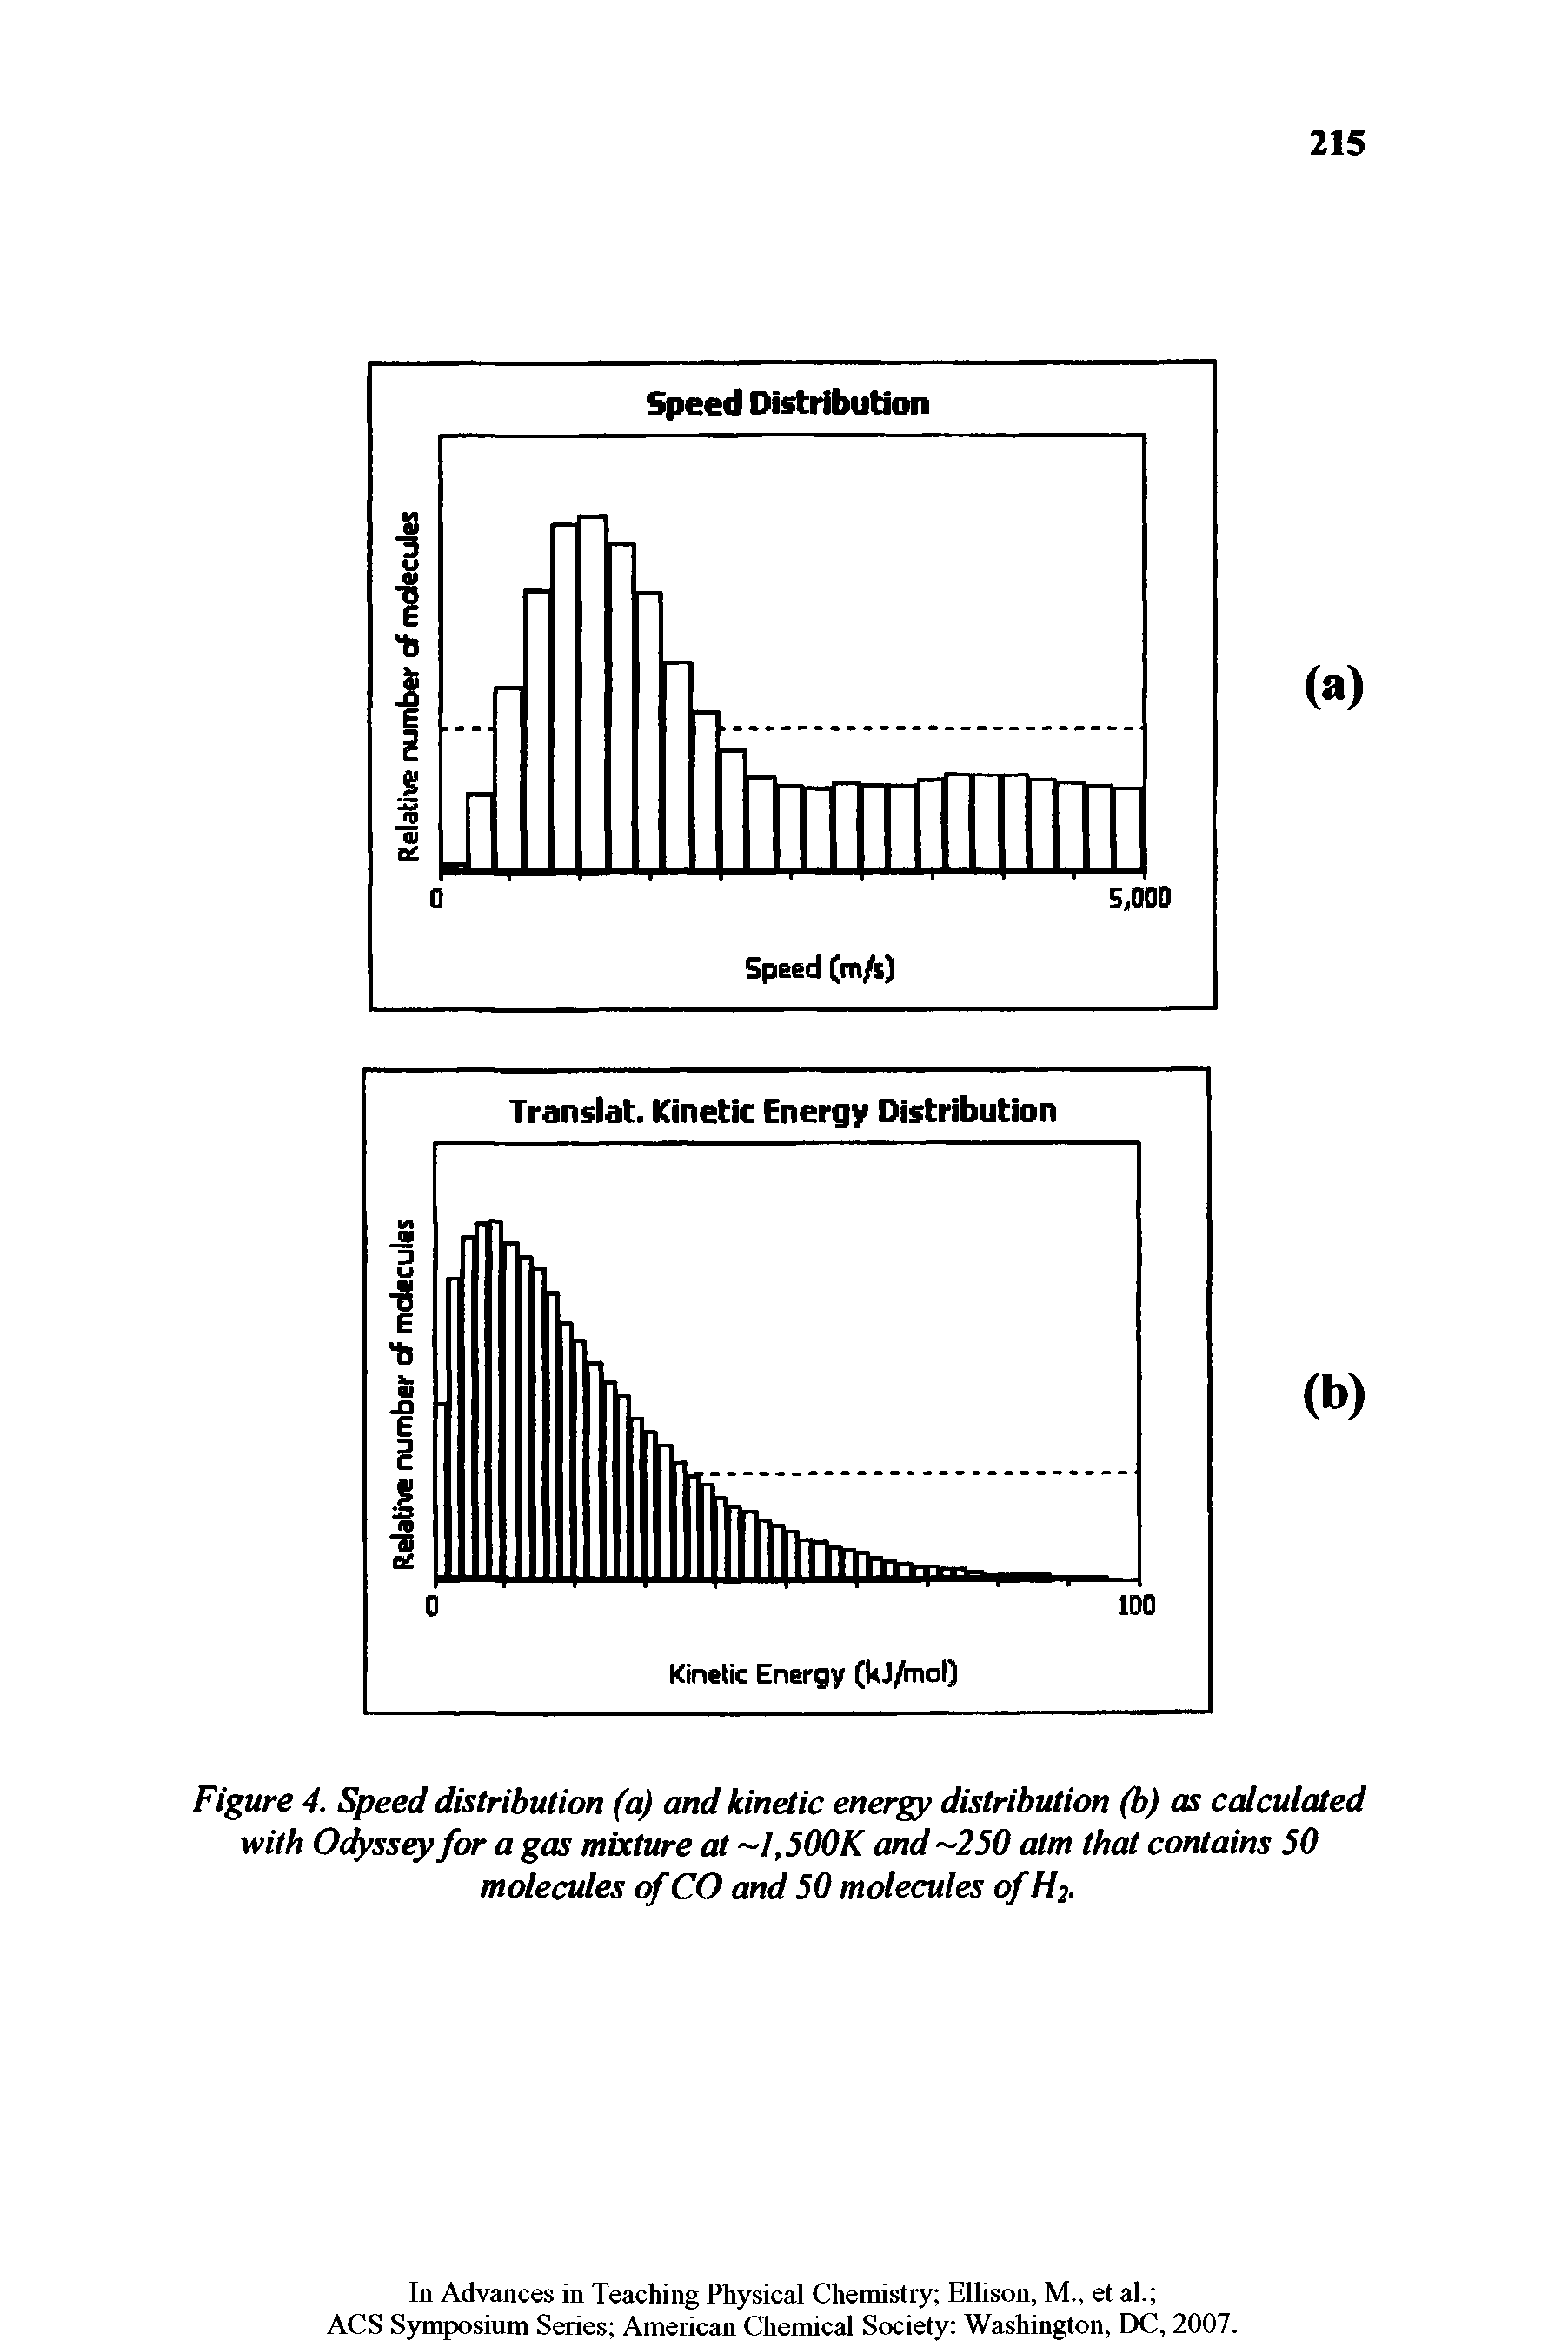 Figure 4. Speed distribution (a) and kinetic energy distribution (b) as calculated with Odyssey for a gas mixture at 1,500K and 250 atm that contains 50 molecules of CO and 50 molecules of H2.